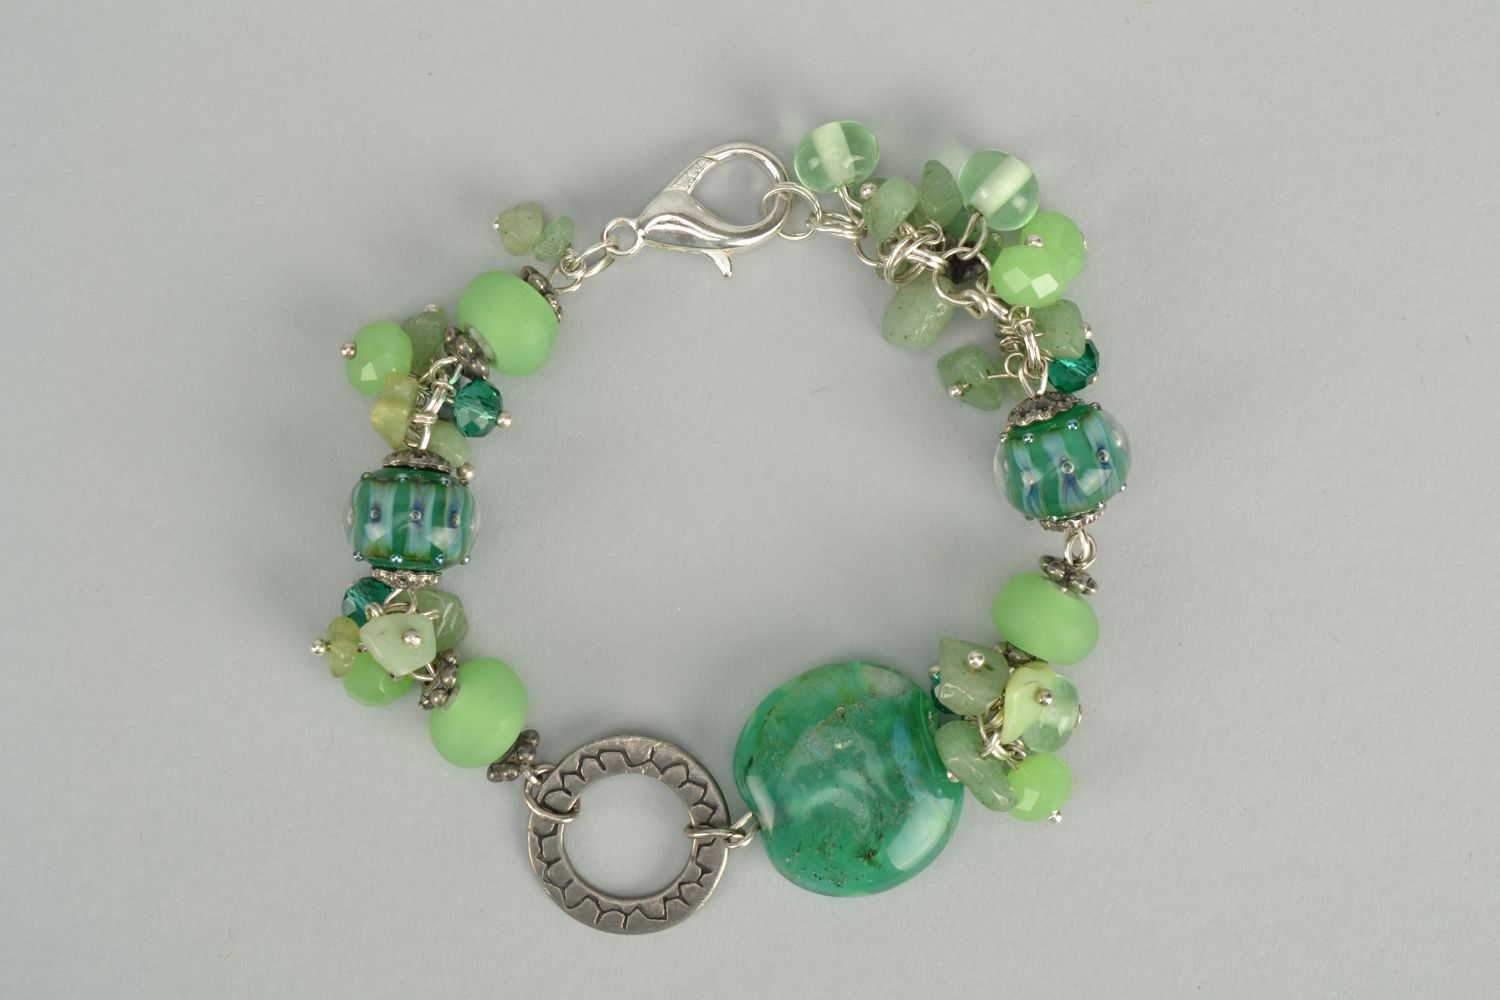 Bracelet with natural stones and lampwork glass beads photo 1